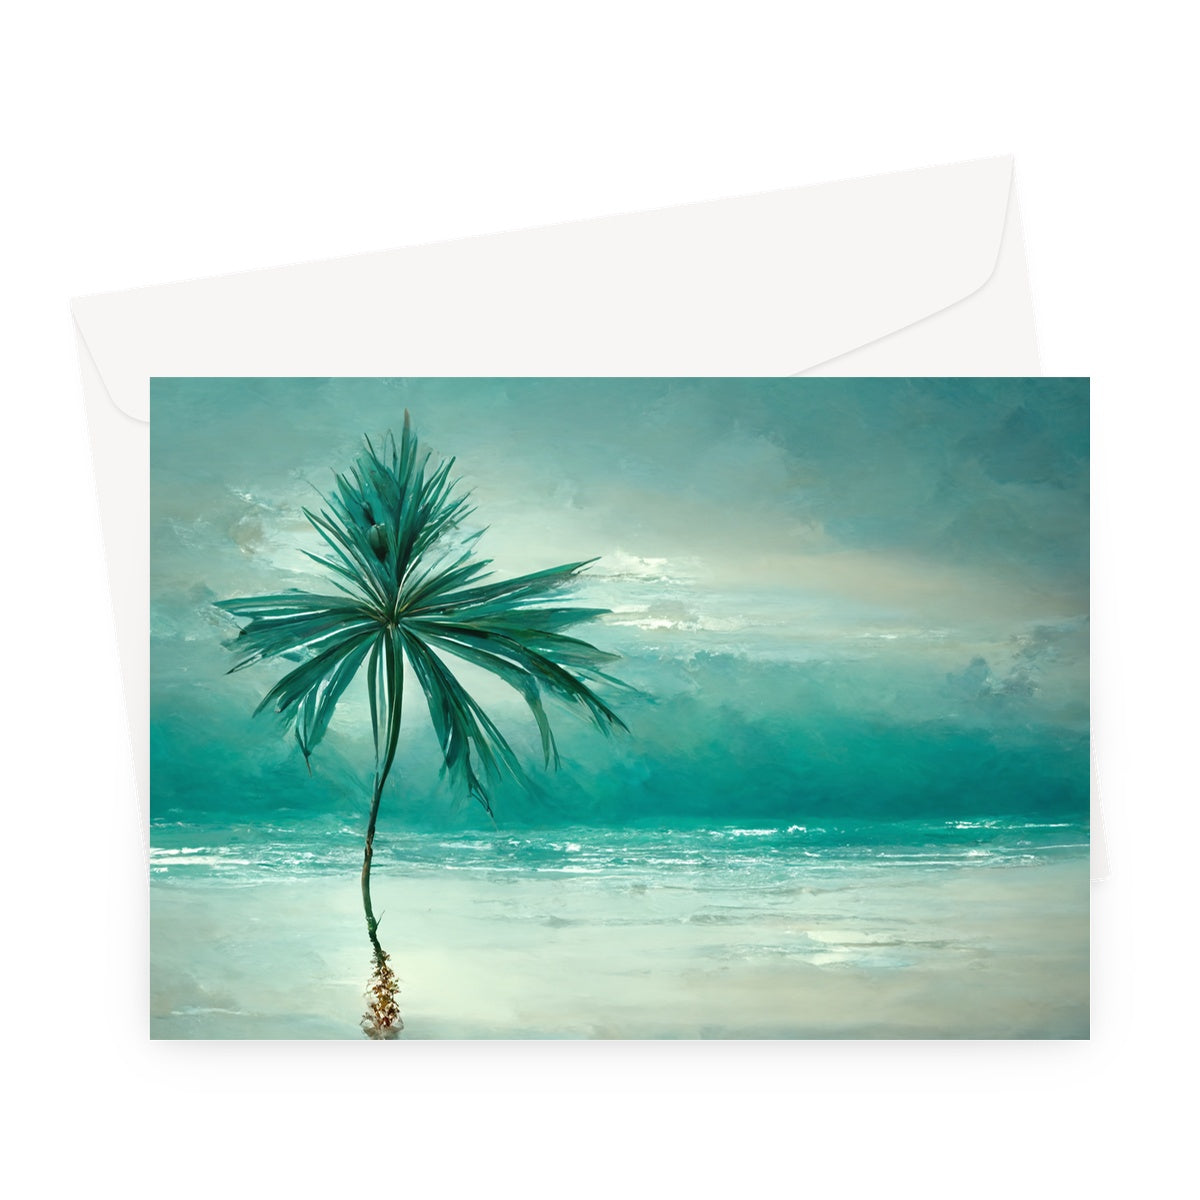 Lonesome Palm Greeting Card